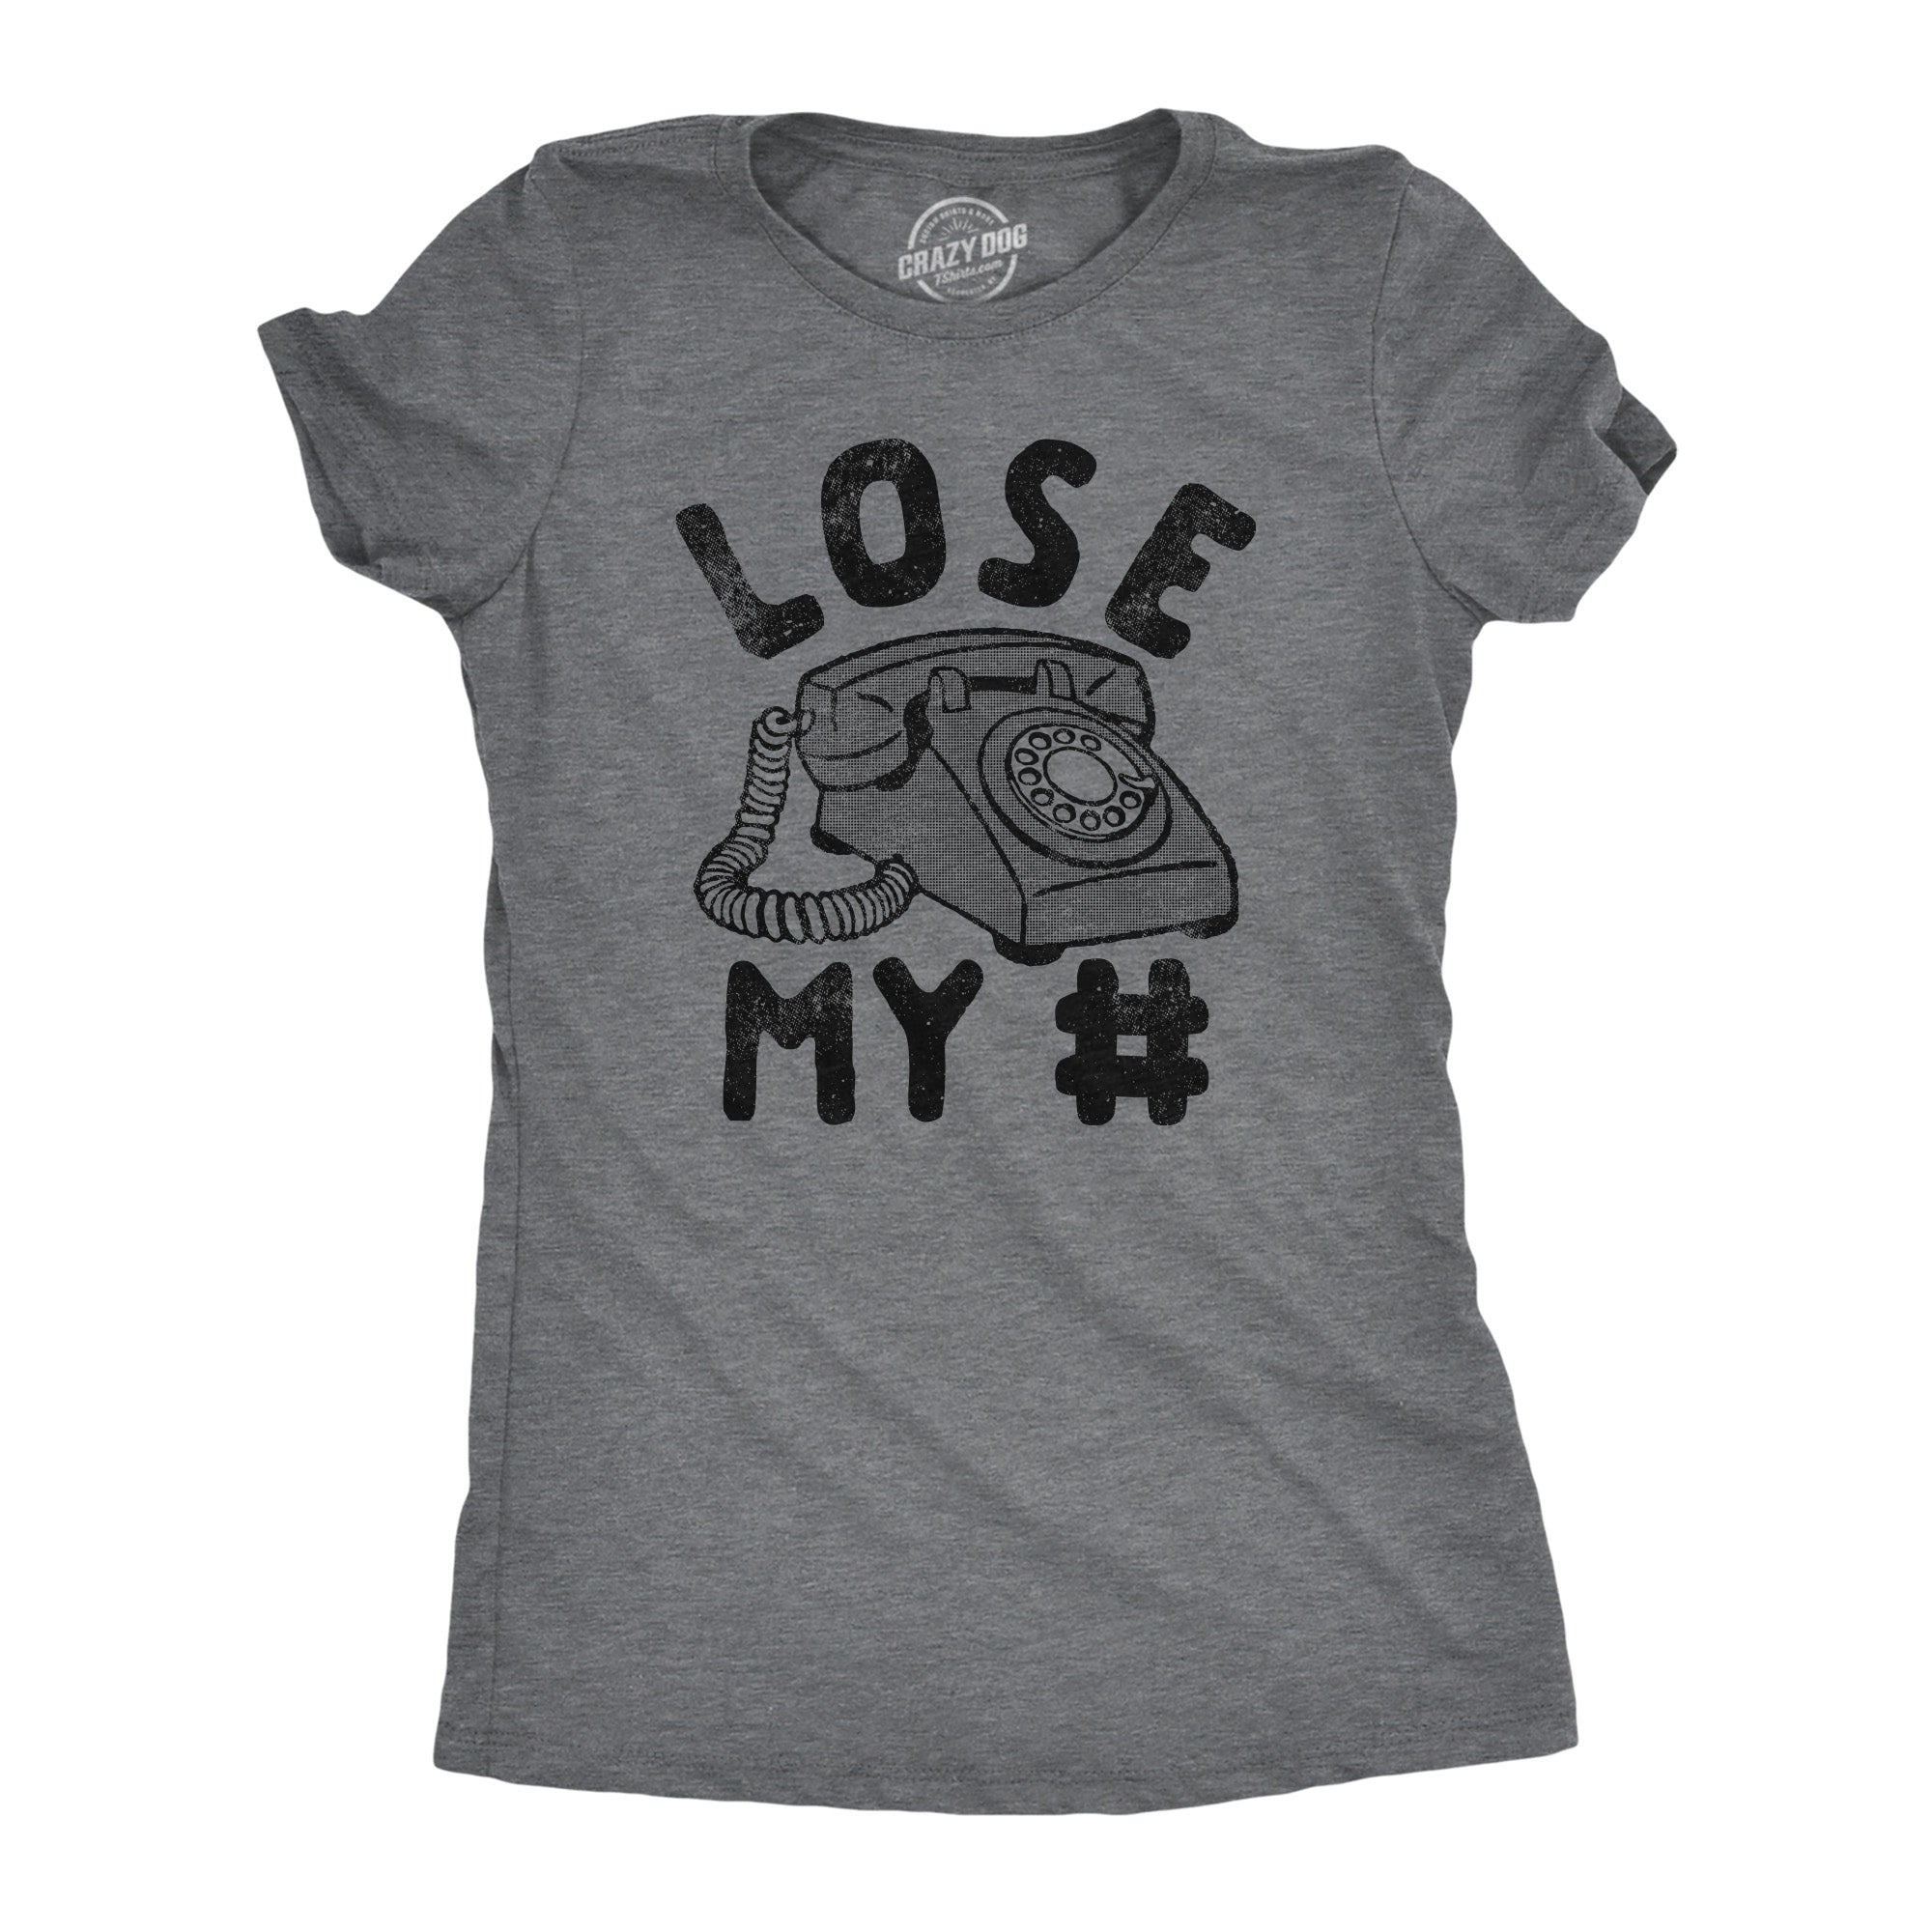 Funny Dark Heather Grey - Lose My Number Lose My Number Womens T Shirt Nerdy Sarcastic Tee